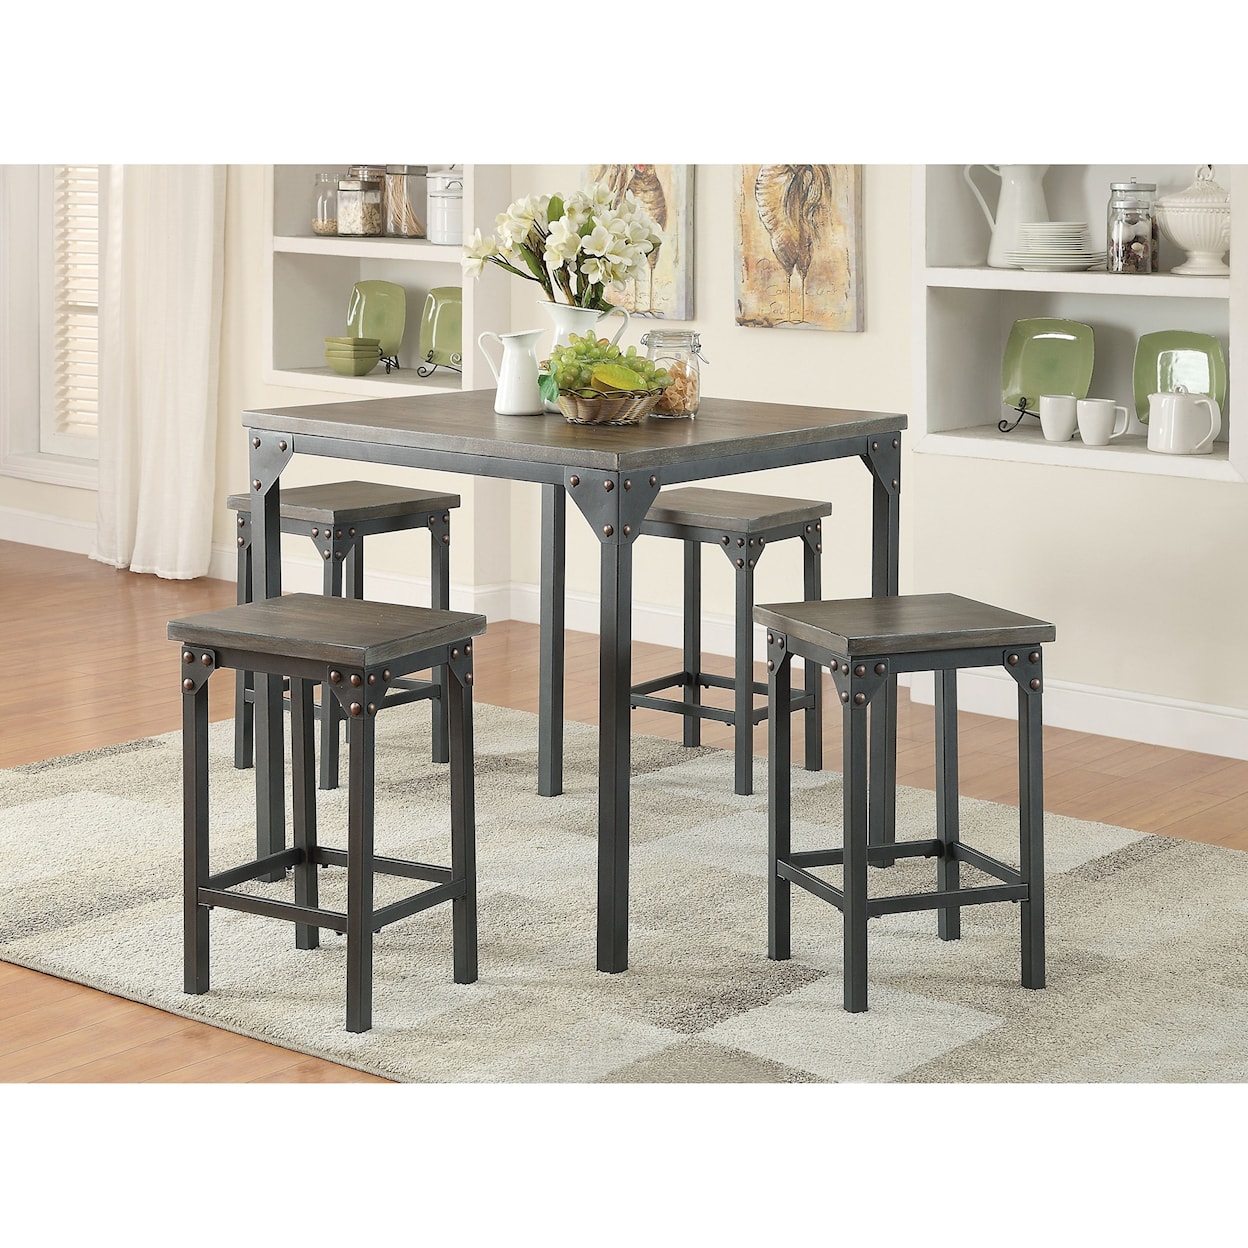 Acme Furniture Percie Counter Height Dining Set with 4 Stools